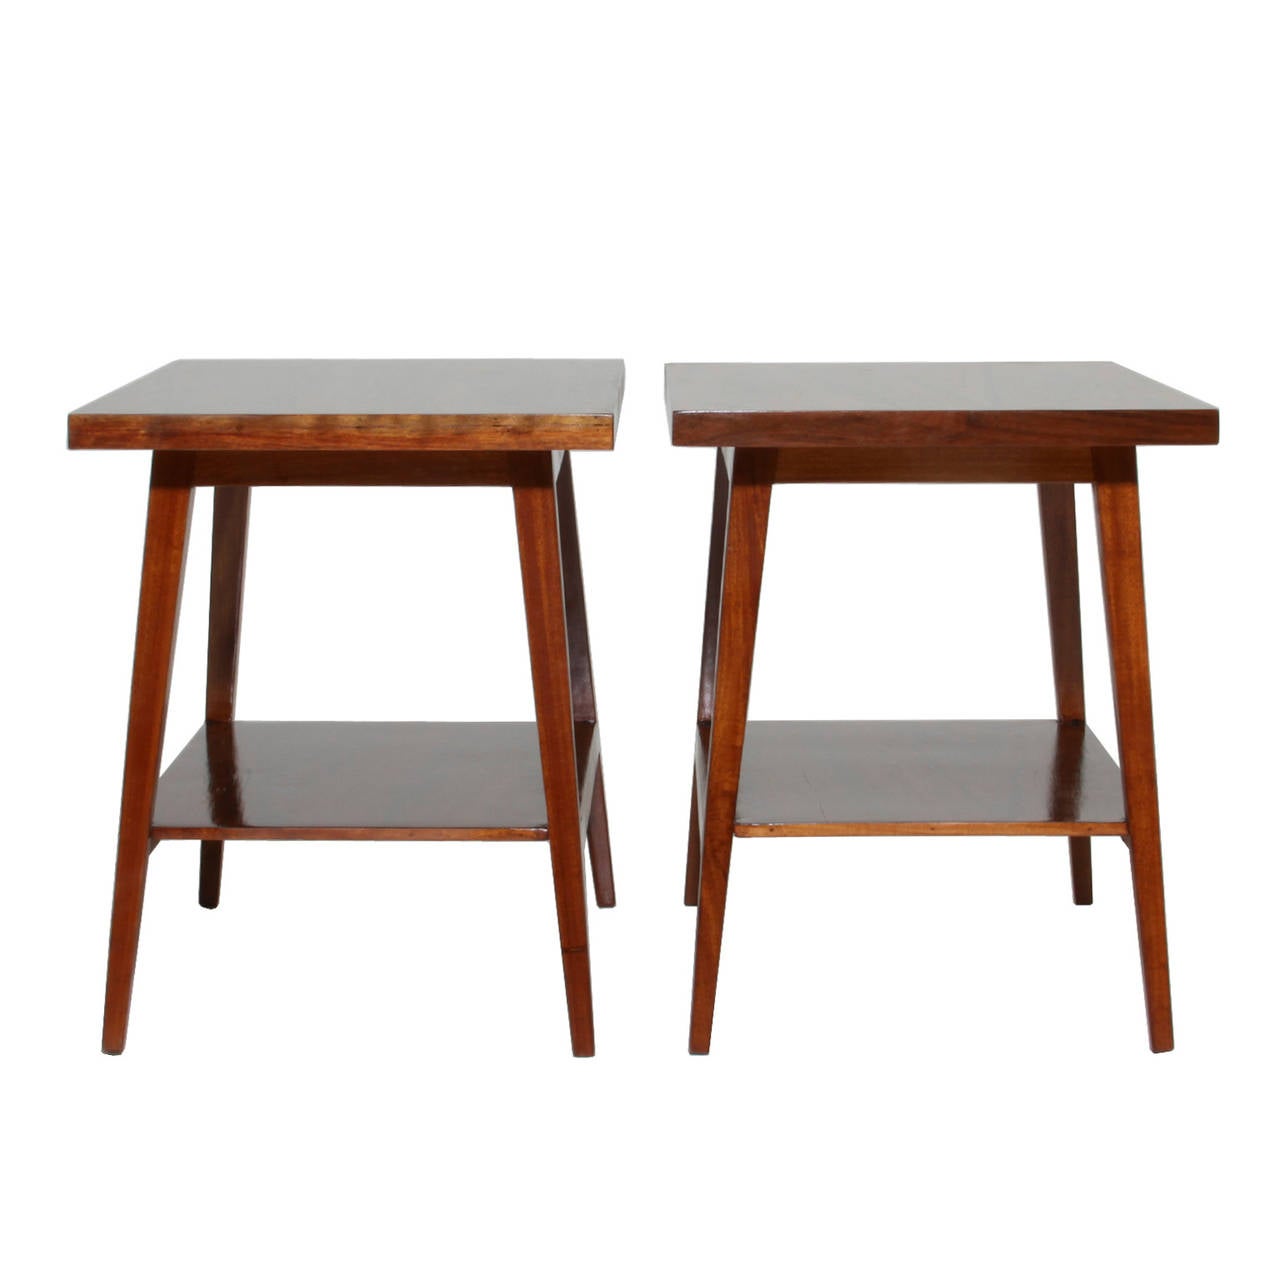 Pair of side tables or nightstands from Brazil. Made from solid rosewood and newly refinished, these tables feature a lower shelf and tapered leg design.

 